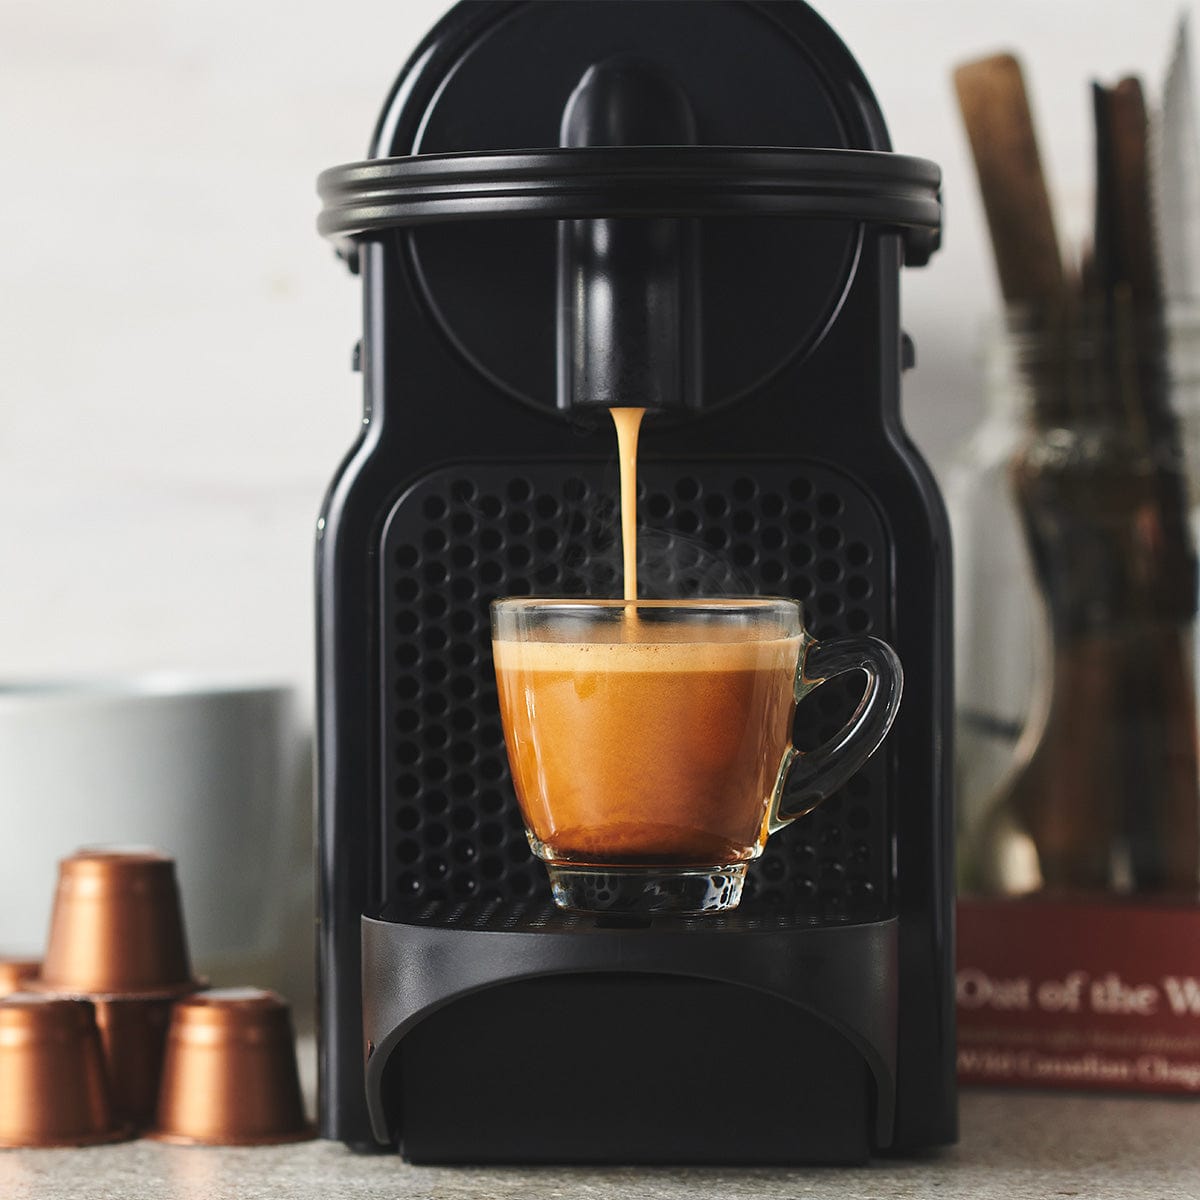 An out of the Woods Chaga-Infused Coffee in a Nespresso compatible format by Forage Hyperfoods, in a Nespresso machine.